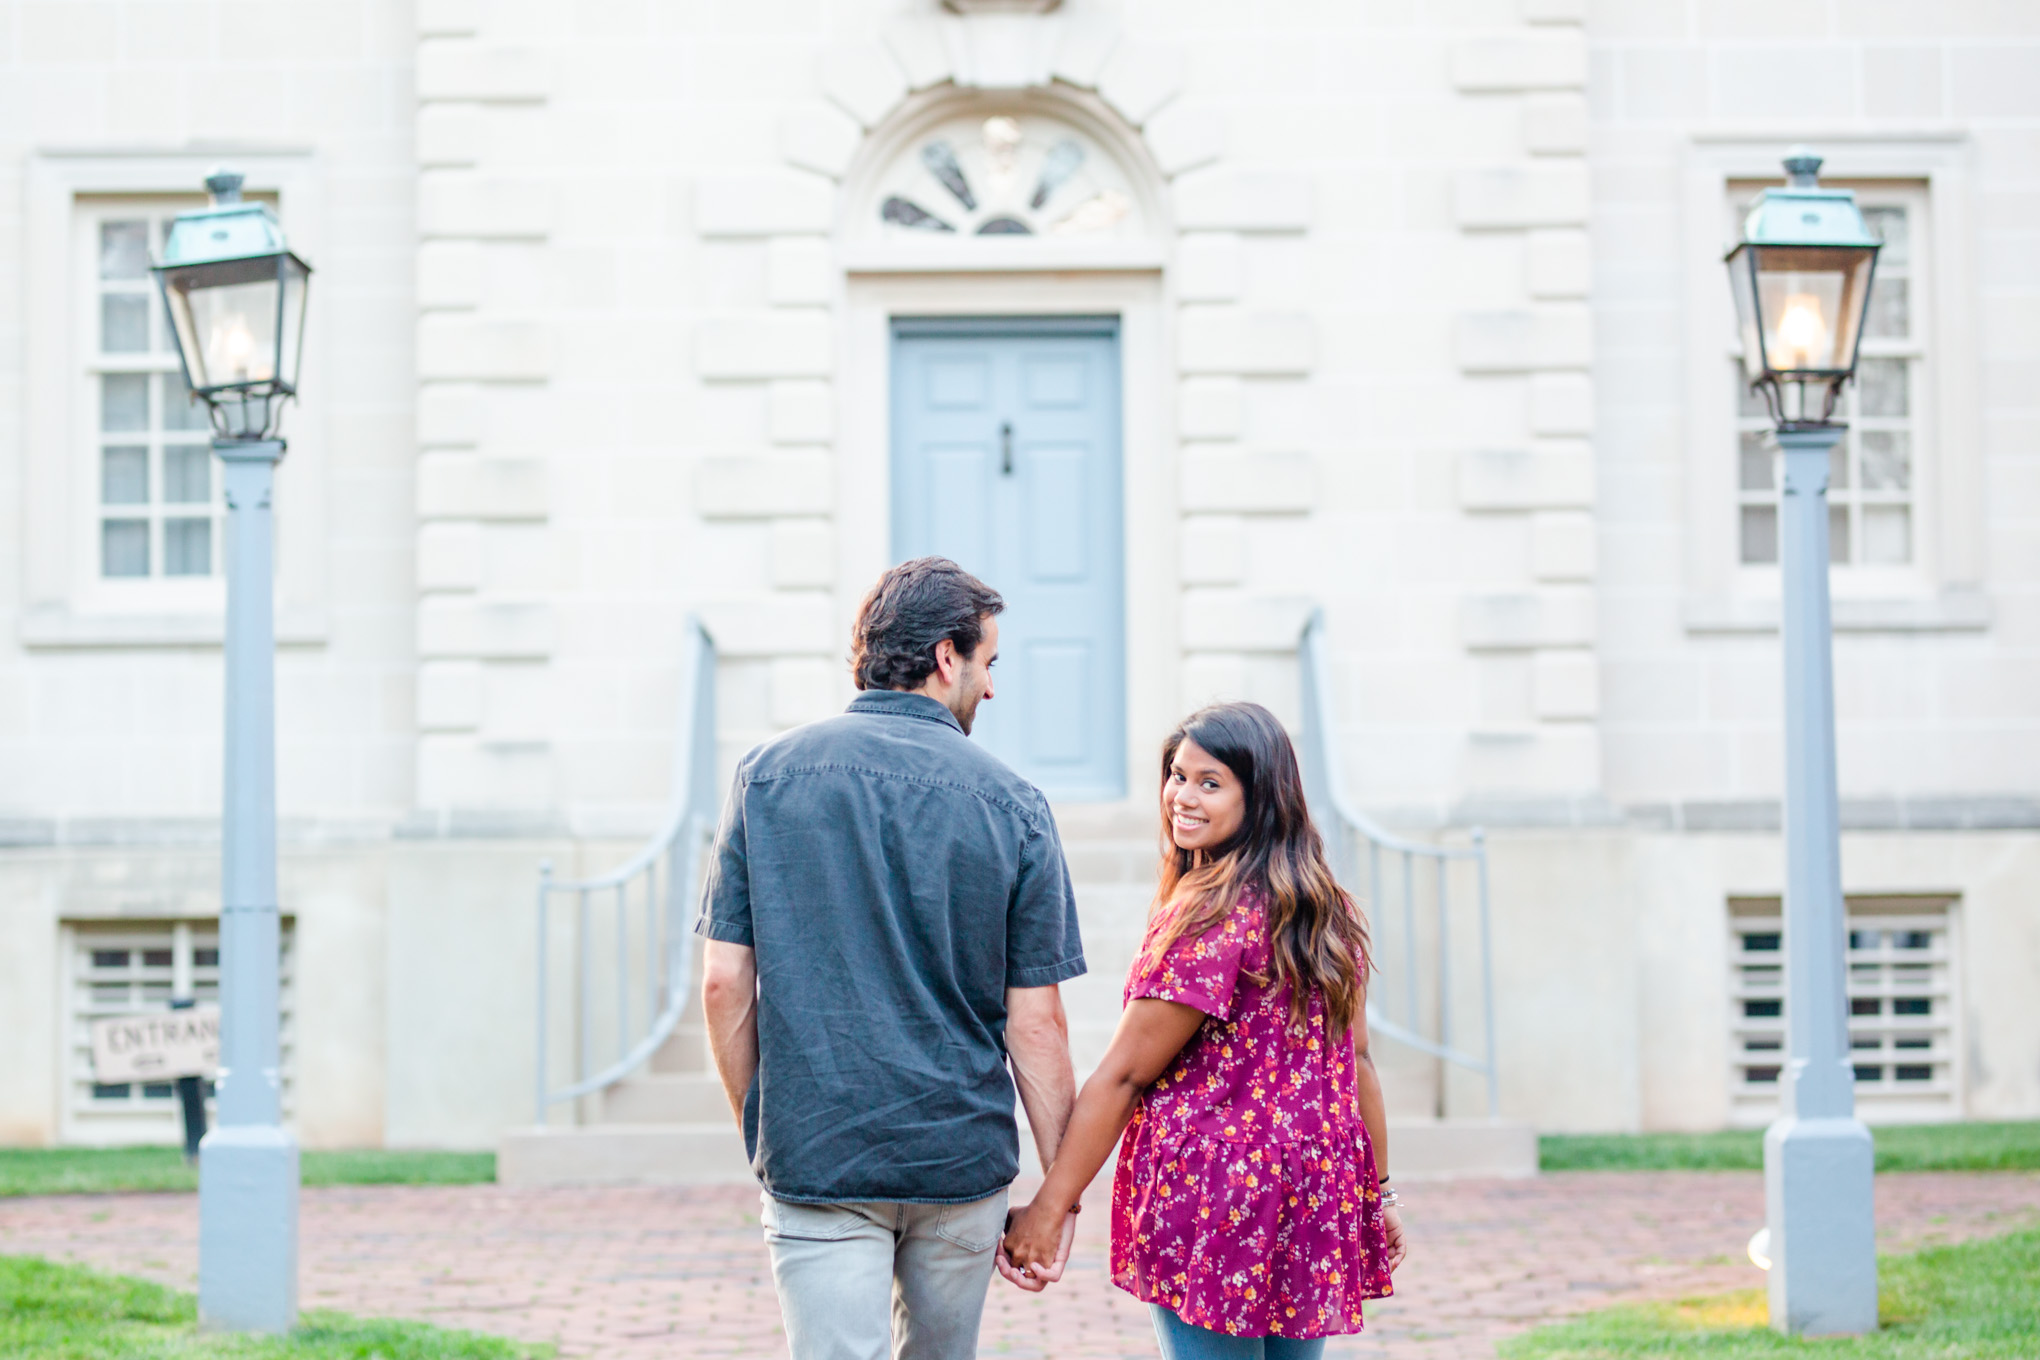 Old Town Alexandria engagement photos, Alexandria engagement photos, Old Town Alexandria photos, Old Town Alexandria, Alexandria engagement photos, Alexandria Virginia, classic engagement photos, historic town engagement photos, engagement photos, Rachel E.H. Photography, Carlyle House engagement photos, couple walking